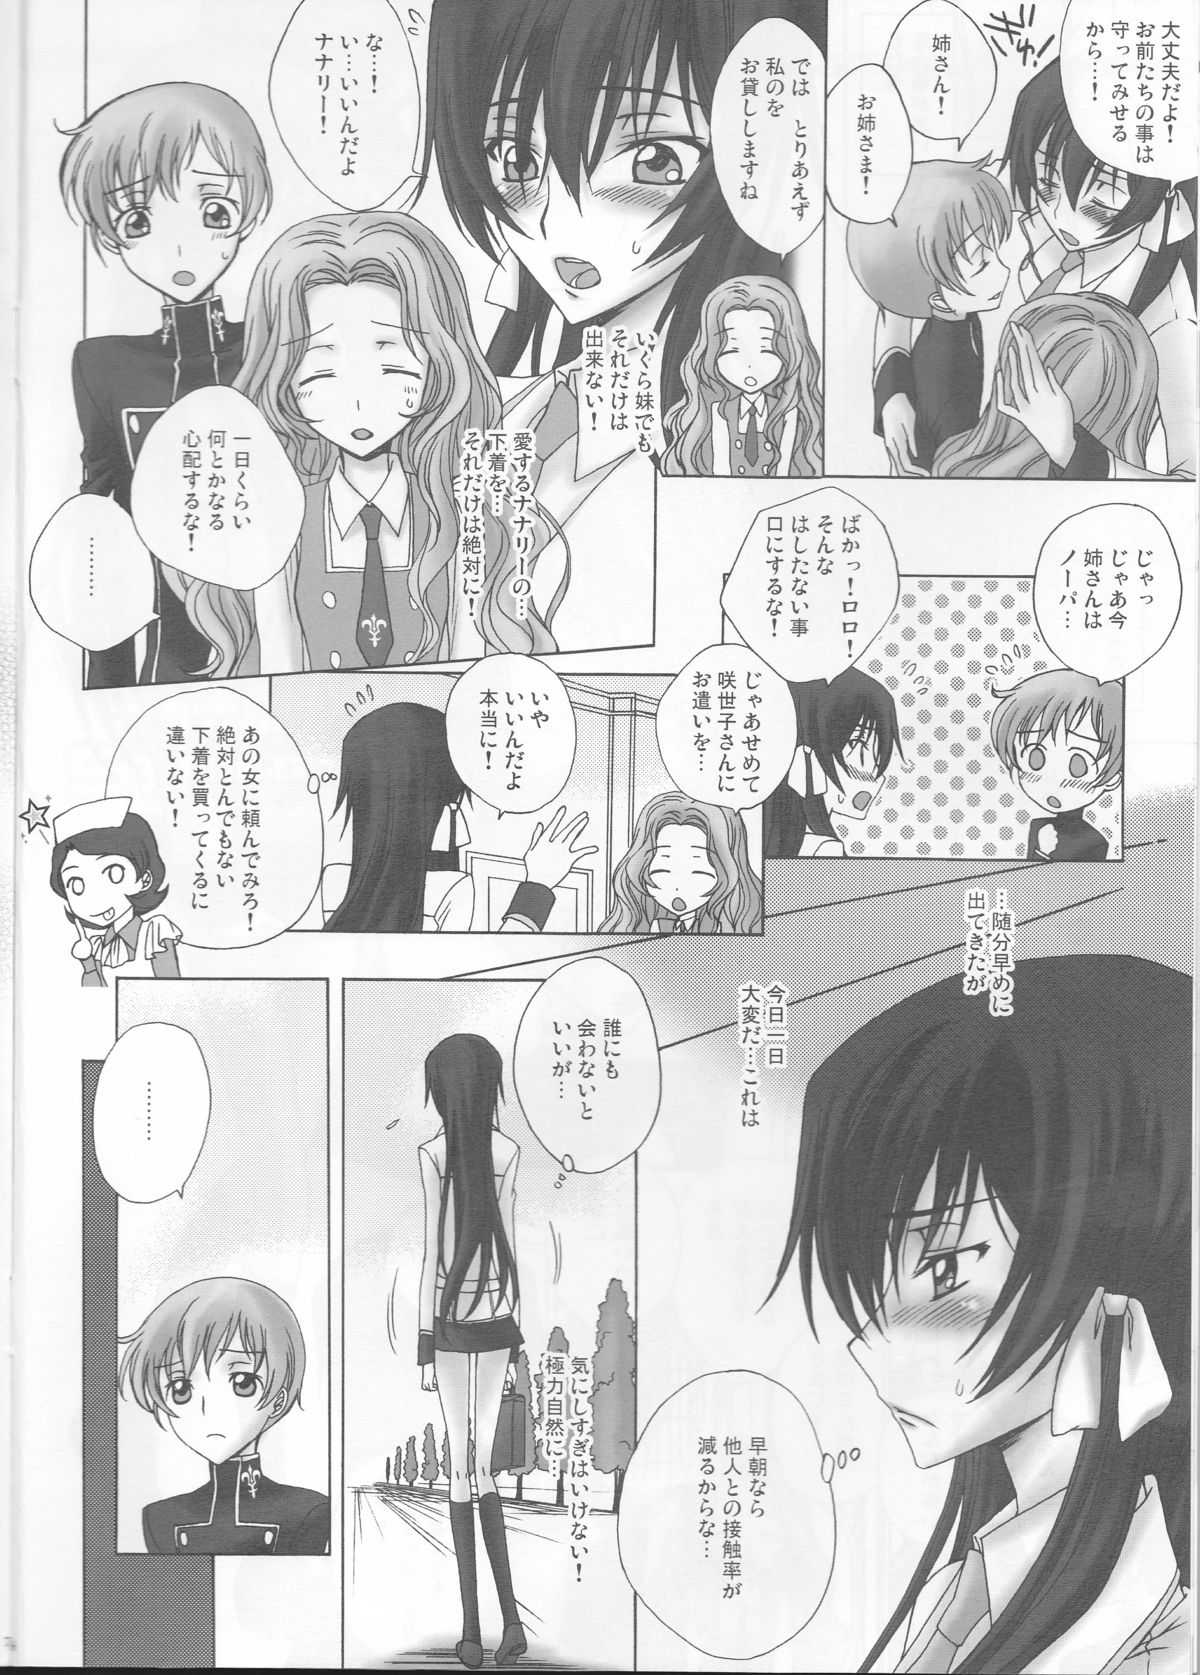 [MAX&COOL. (Sawamura Kina)] Lyrical Rule StrikerS (CODE GEASS: Lelouch of the Rebellion) page 6 full